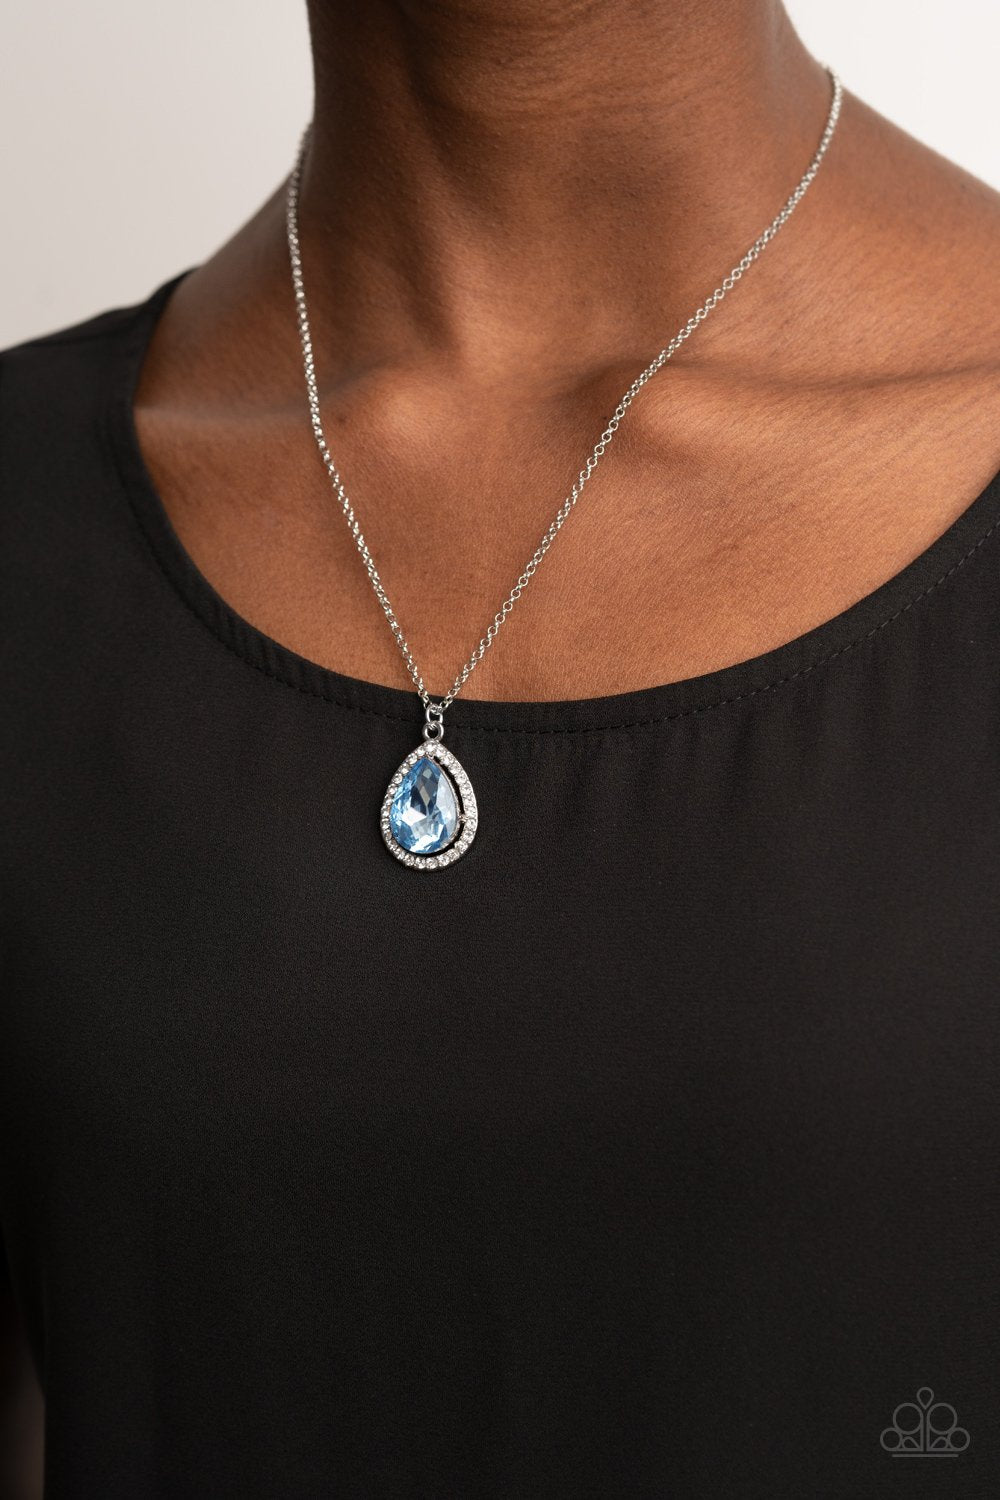 &lt;p&gt;An oversized Cerulean rhinestone teardrop is pressed into the center of a silver frame bordered in white rhinestones, creating a glamorous pendant below the collar. Features an adjustable clasp closure. &lt;/p&gt;
 

 &lt;p&gt;&lt;i&gt; Sold as one individual necklace. Includes one pair of matching earrings.
 &lt;/i&gt;&lt;/p&gt;
 

&lt;h5&gt;Paparazzi Accessories • $5 Jewelry&lt;/h5&gt;